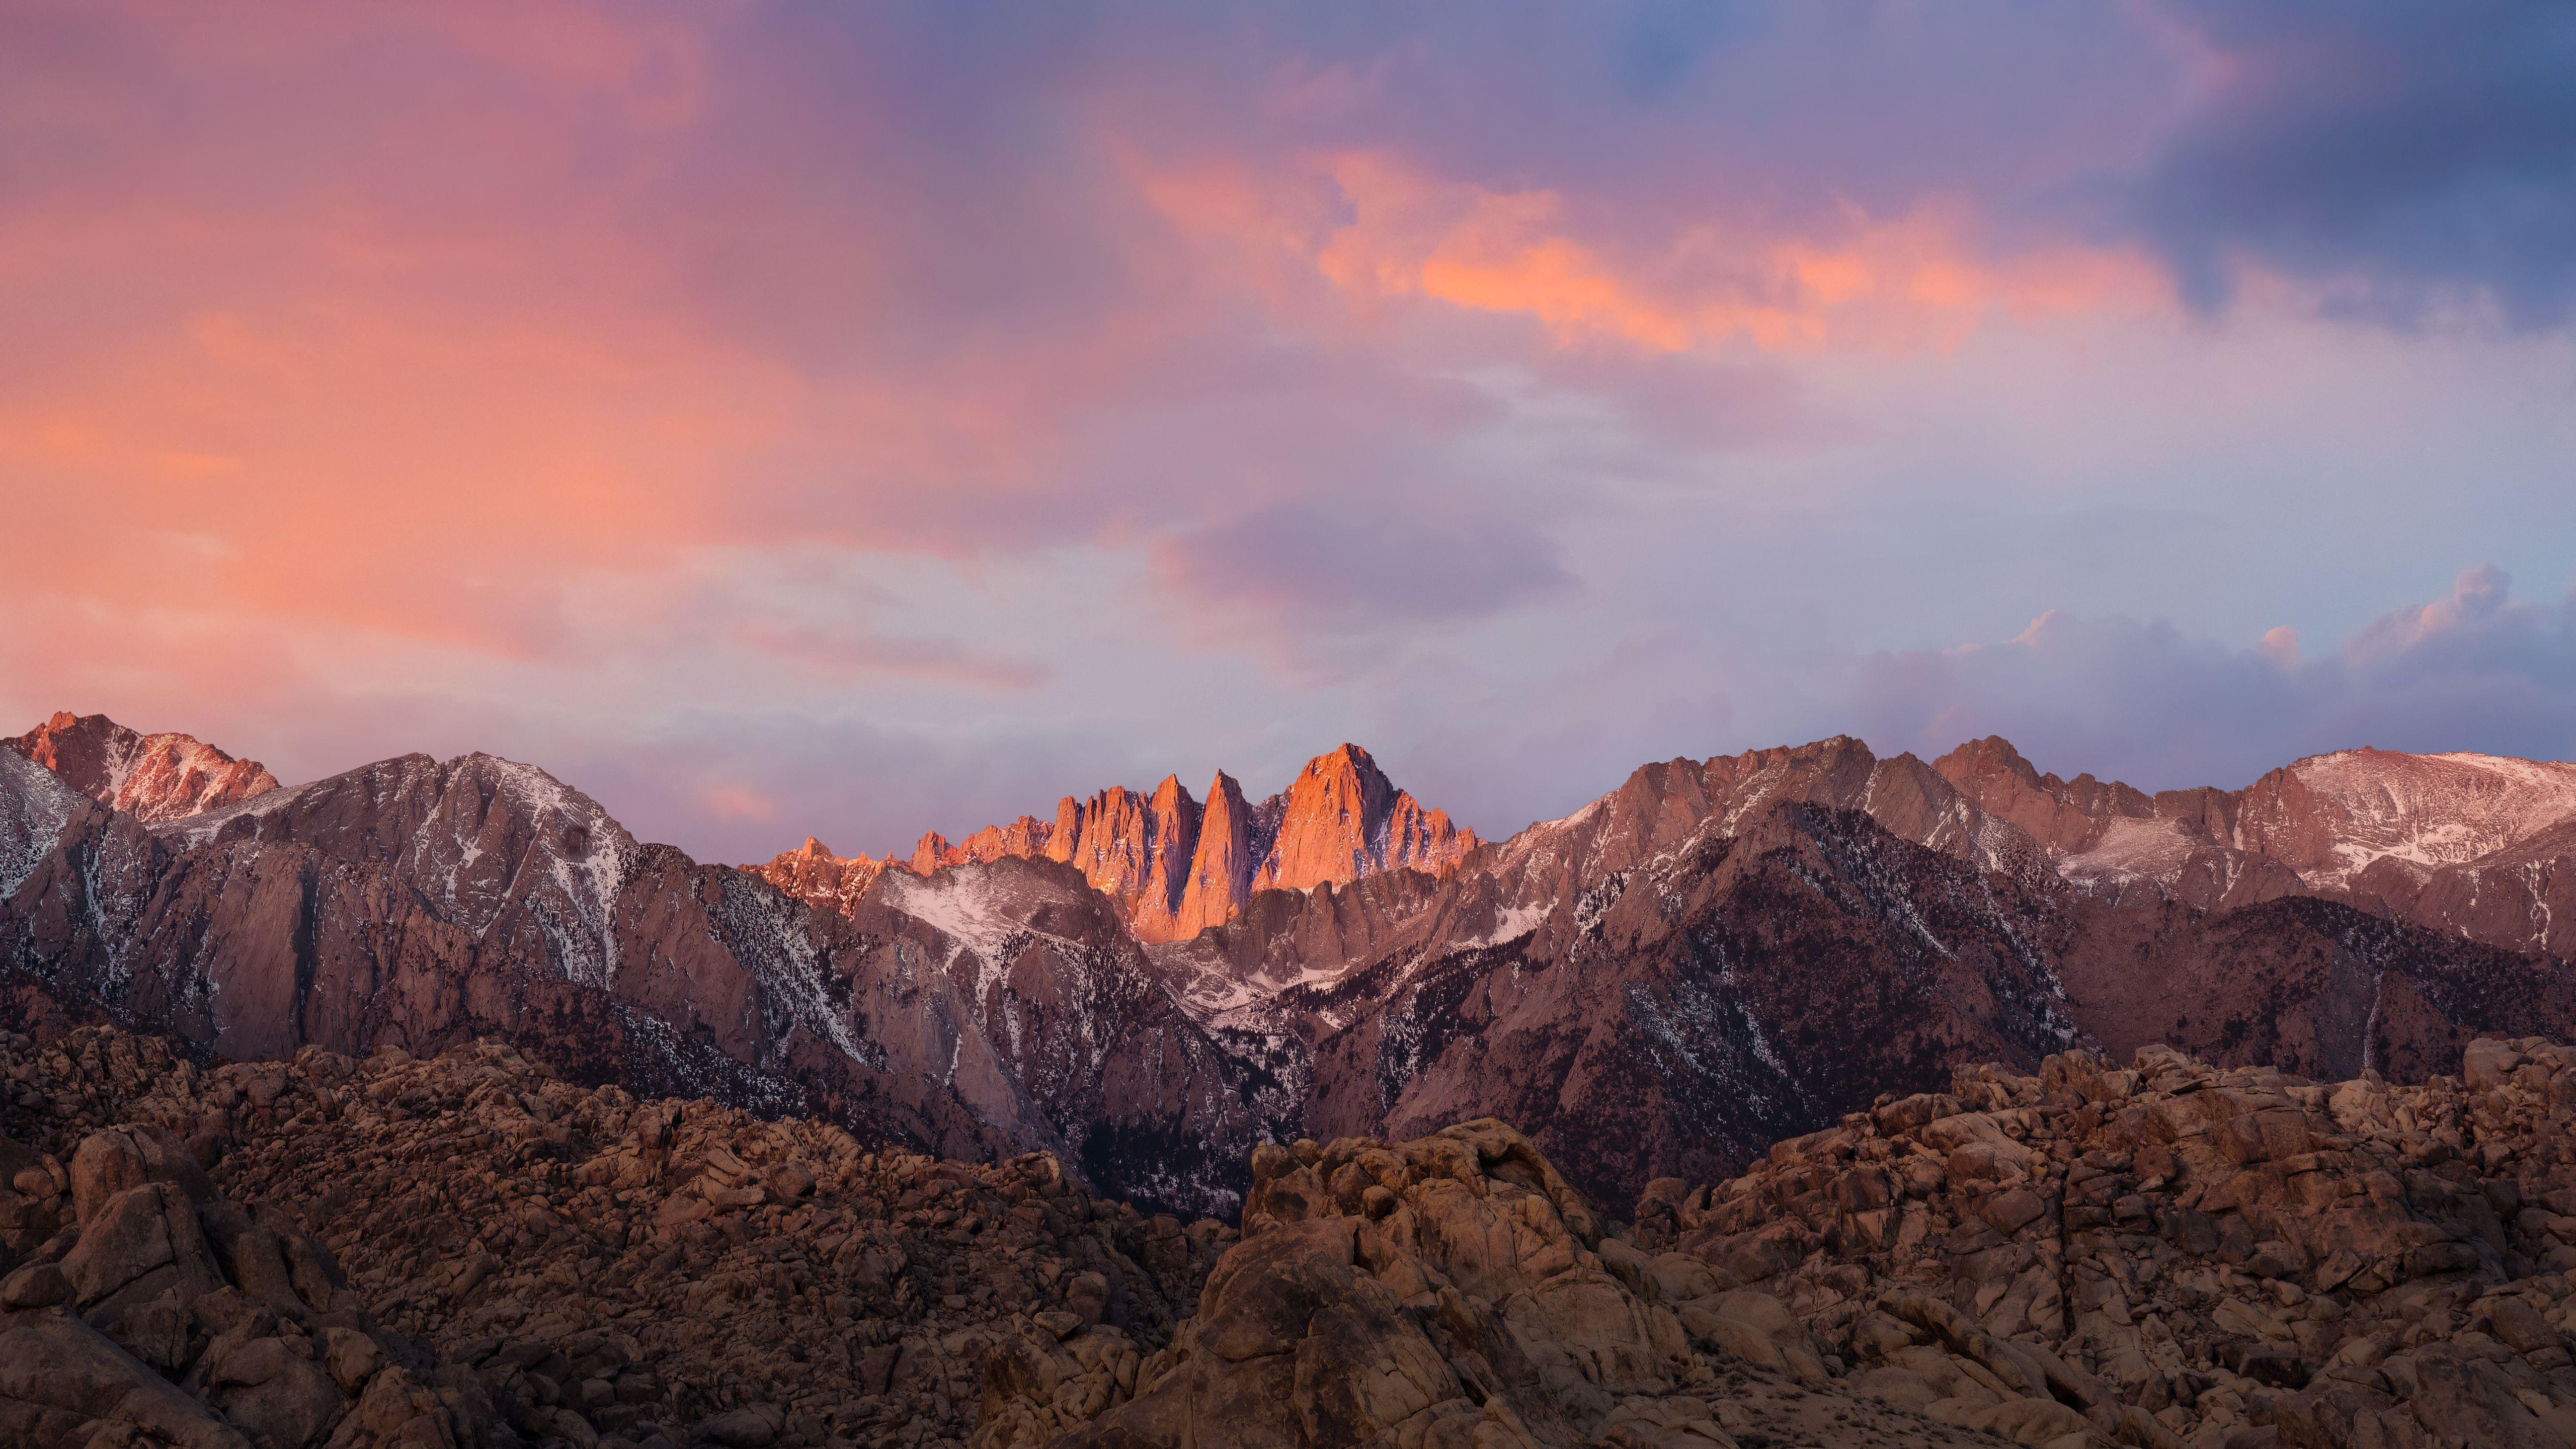 Download the New macOS Sierra Wallpaper Here